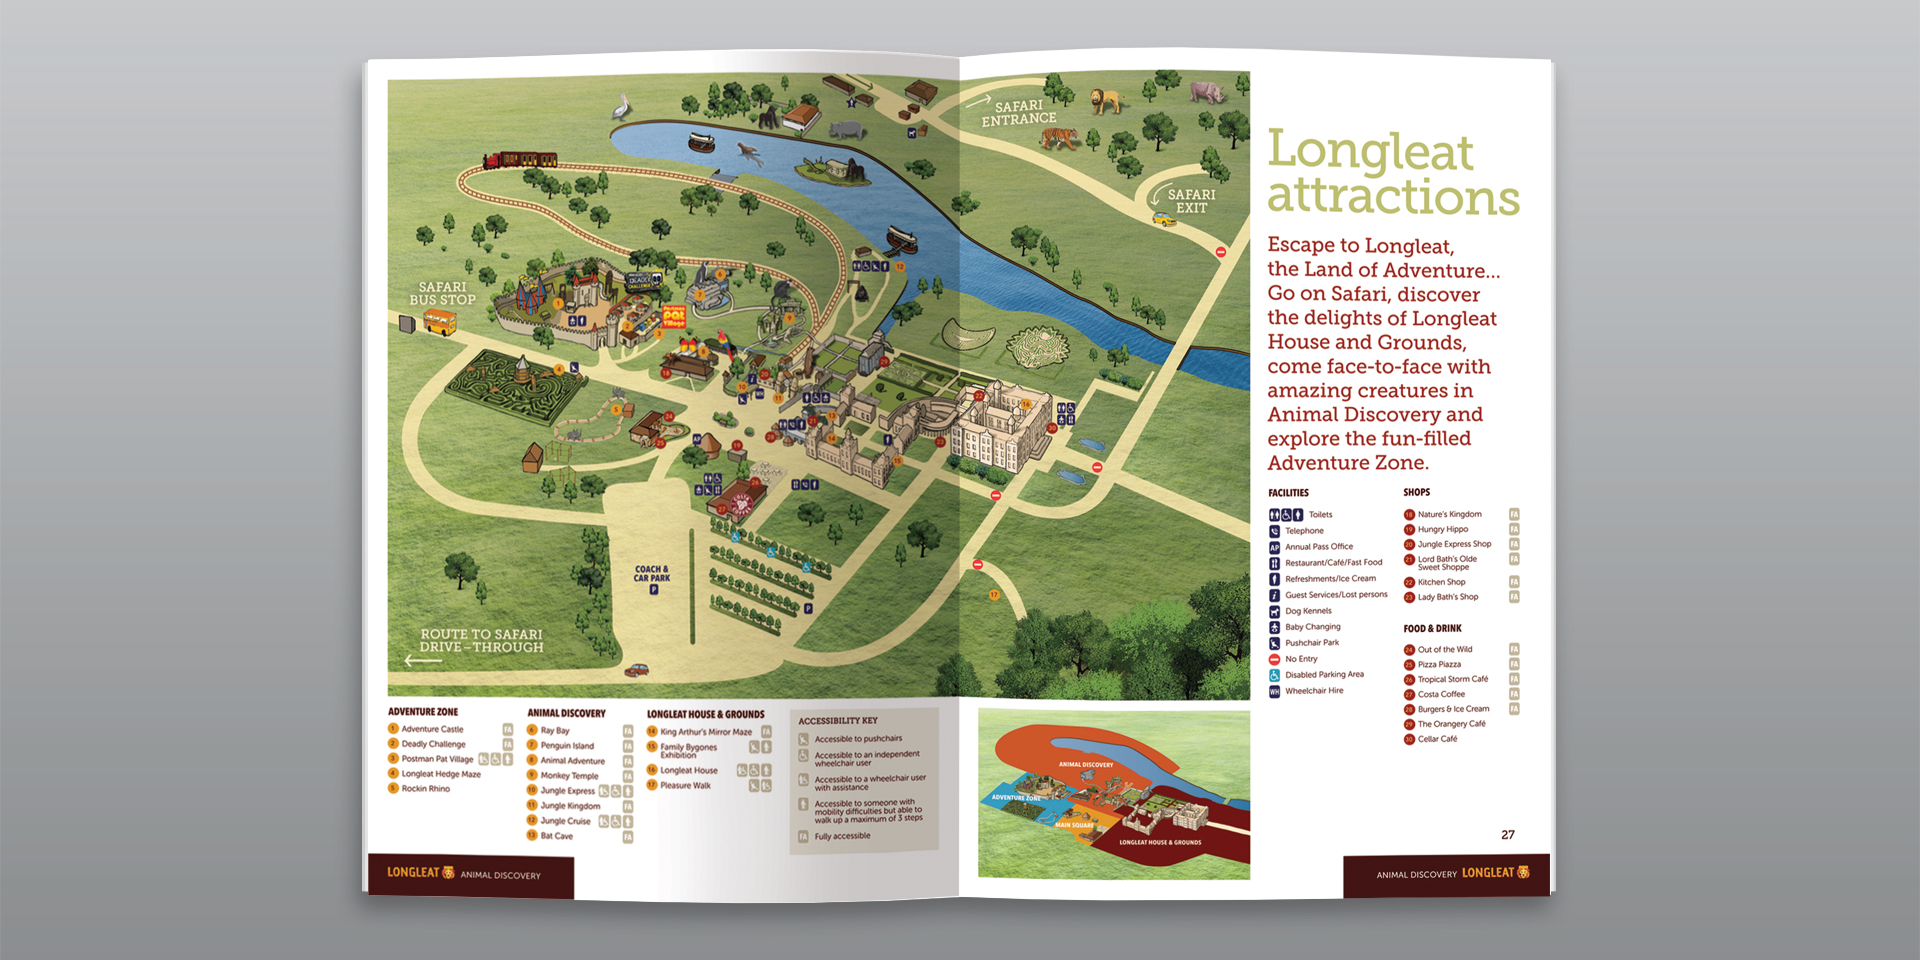 Longleat Guide Attractions Map